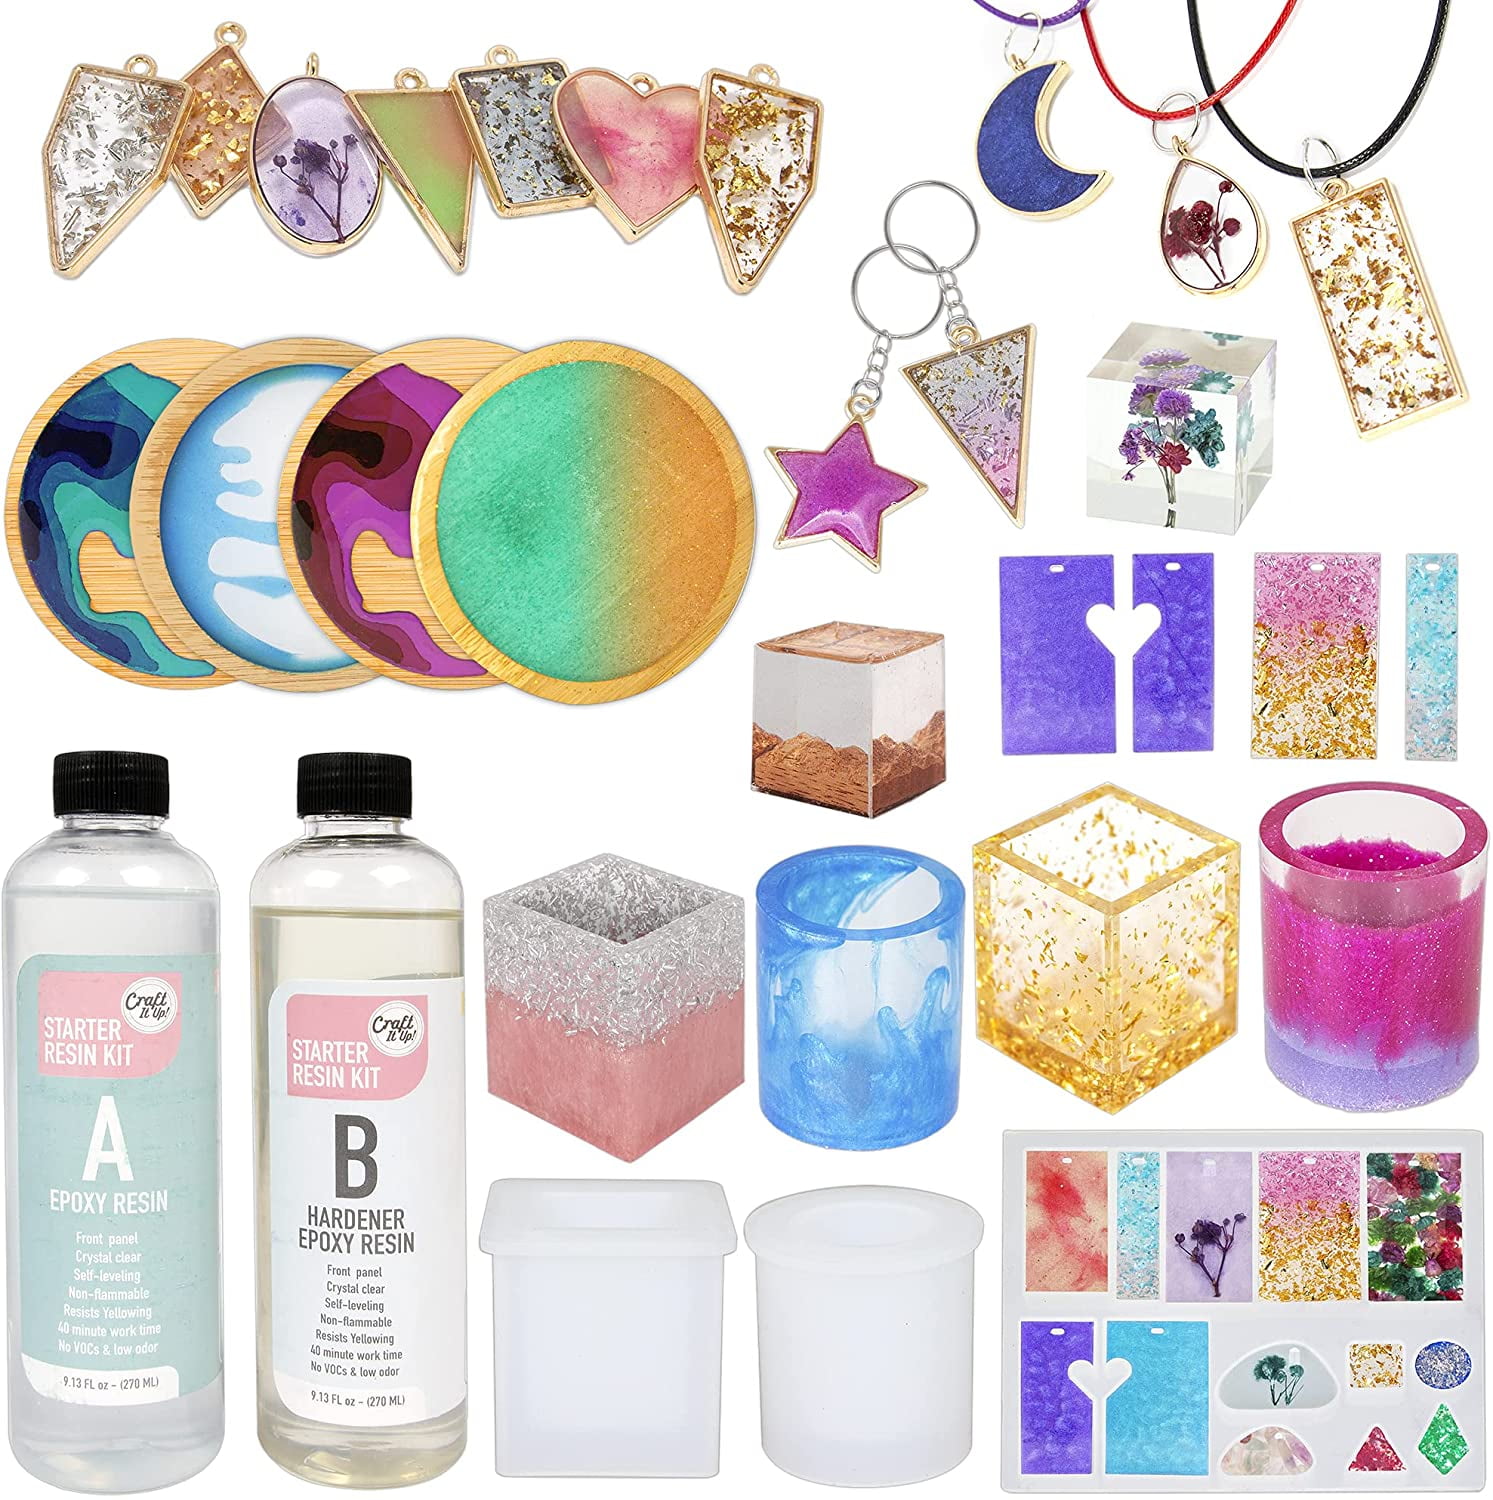 Resin Kit by Craft It Up! - Complete Starter Jewelry Making Resin